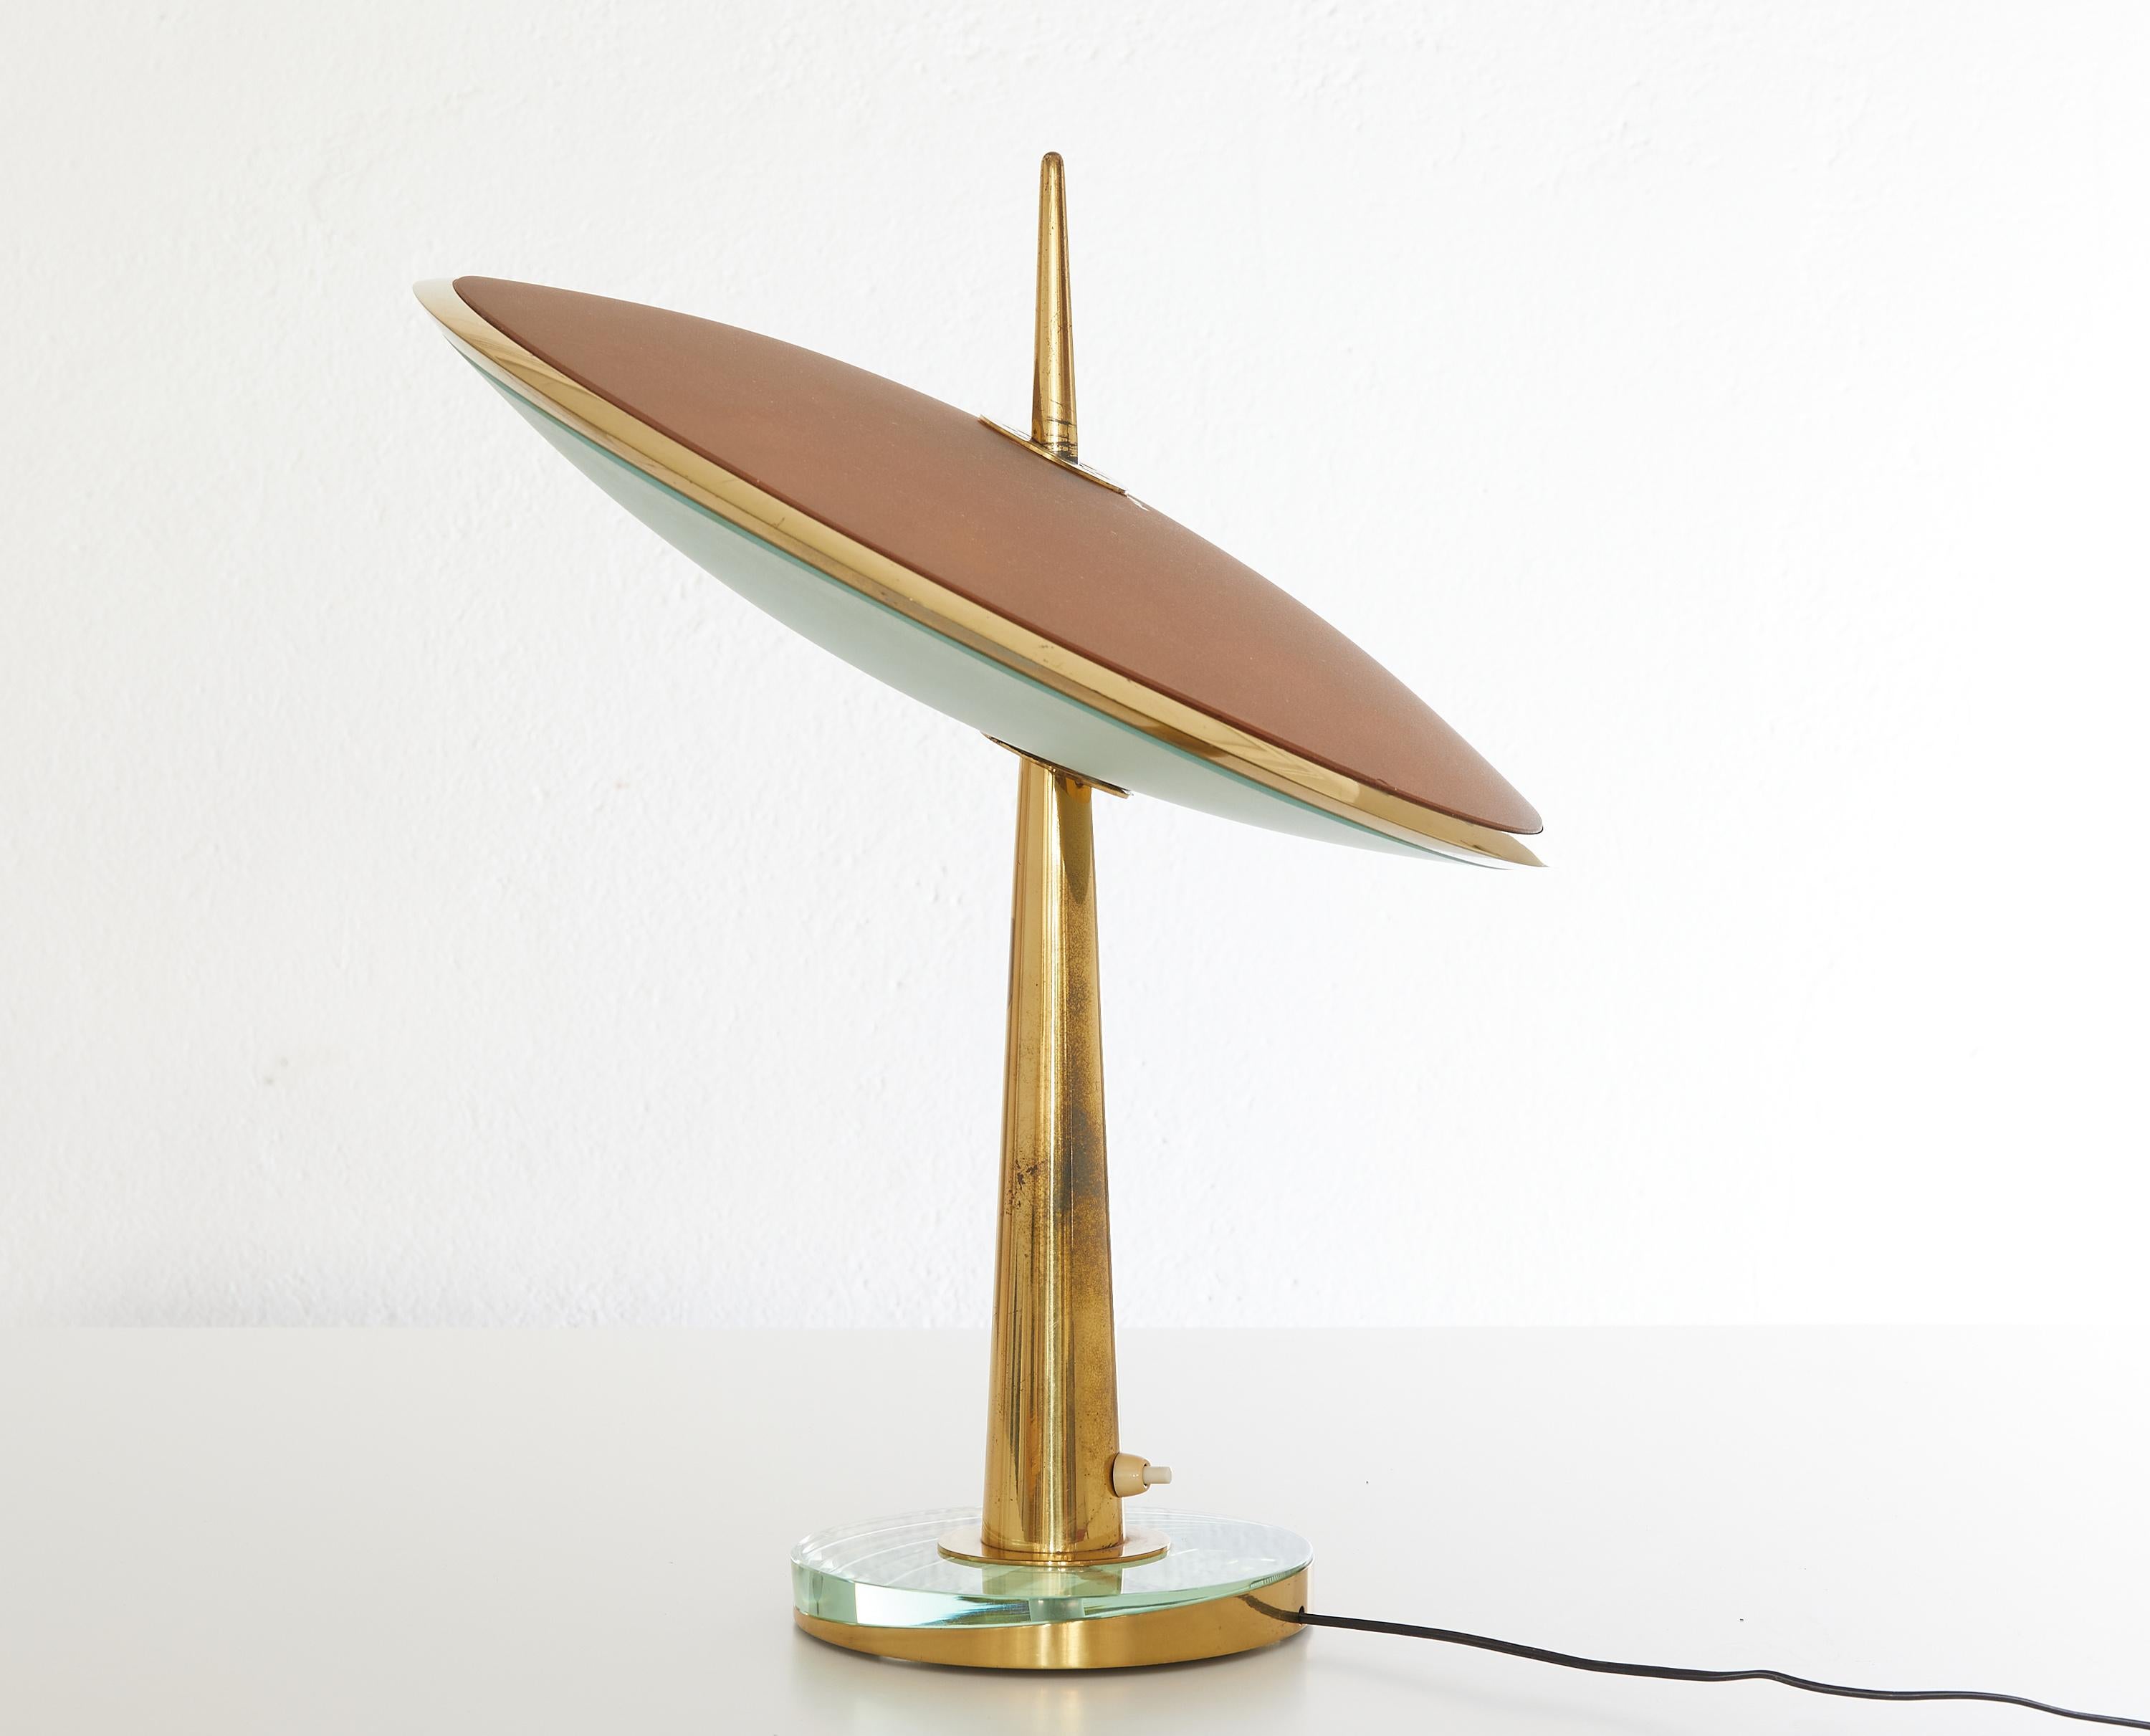 Max Ingrand brass and etched glass table lamp model 1538 by Fontana Arte 1950.

Very rare and magnificent table lamp by Max Ingrand. Probably one of the most beautiful table lamps of the 1950s. 

The glass reflector is composed of two ellipses